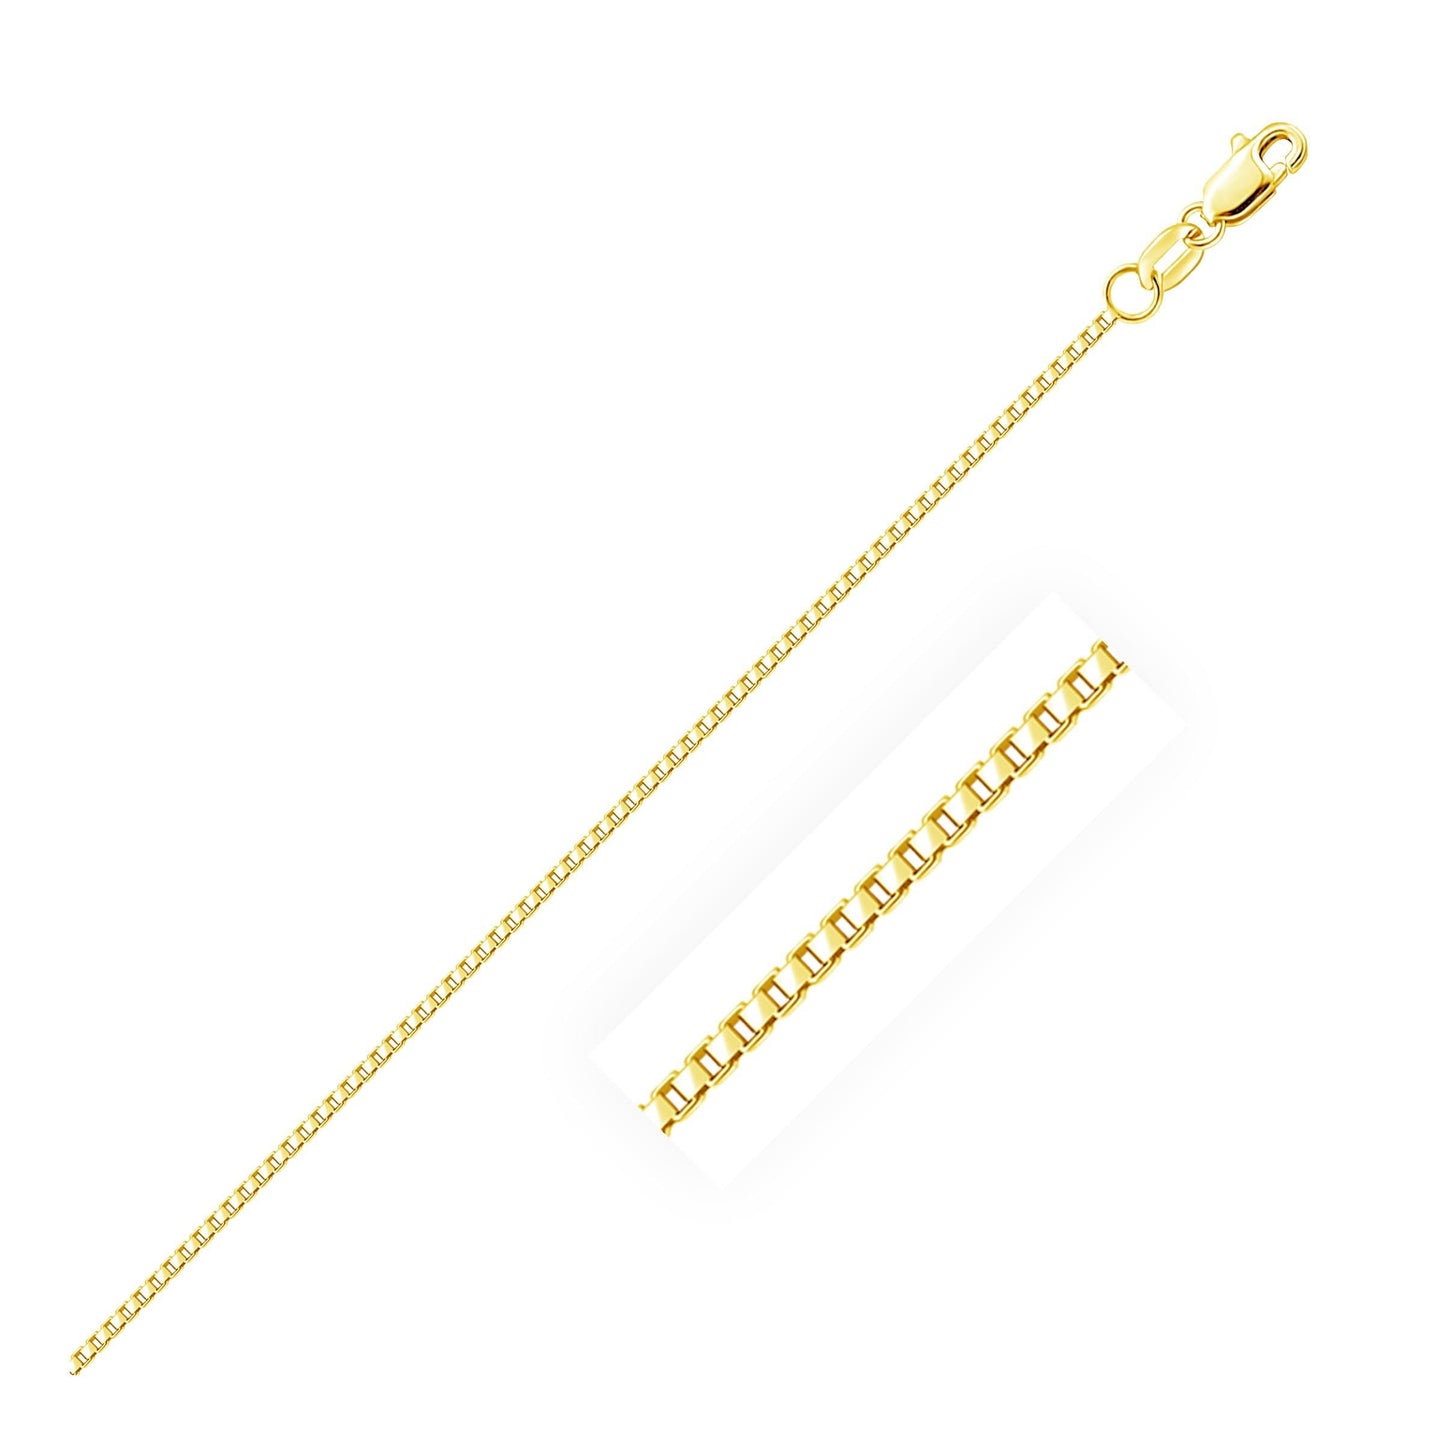 10k Yellow Gold Octagonal Box Chain in 1.2 mm